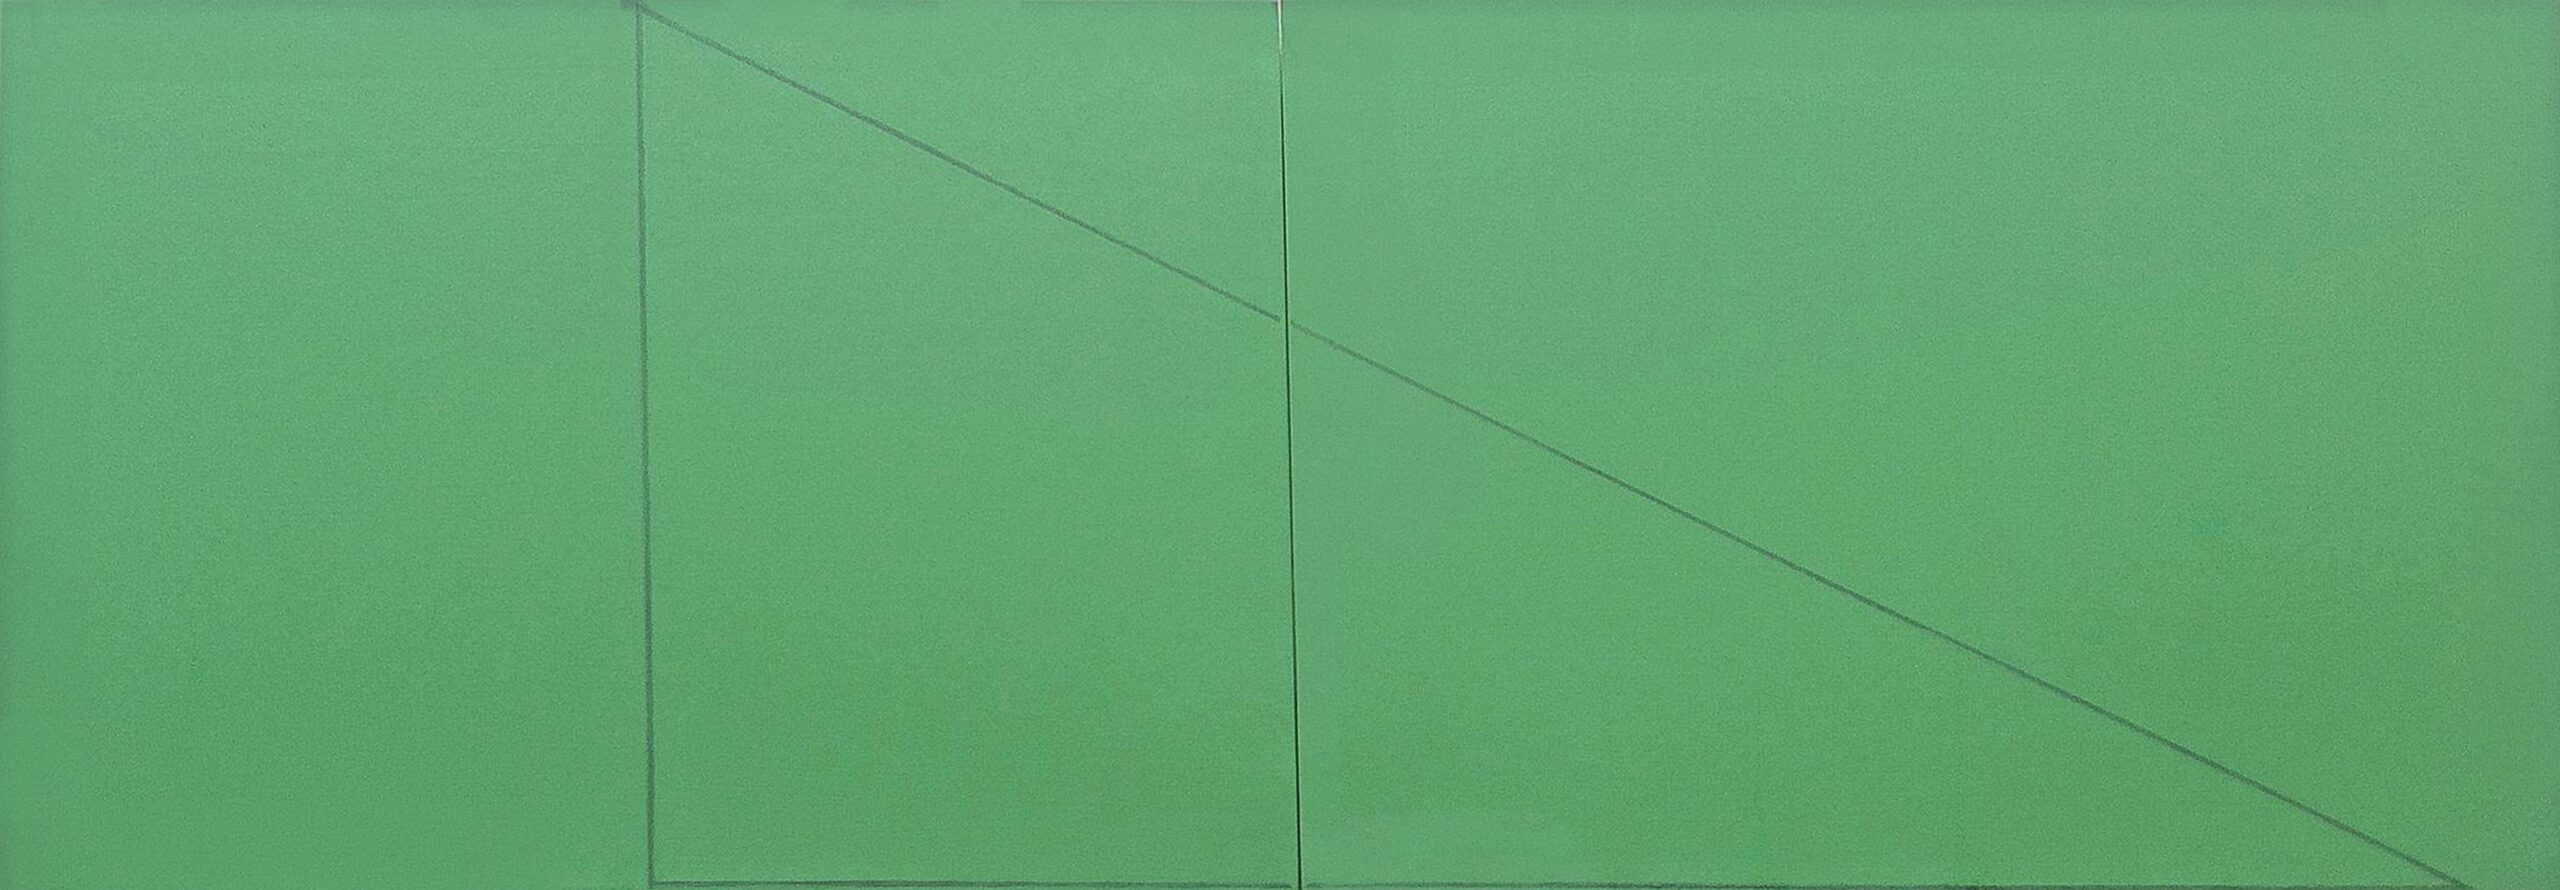 A Triangle Within Two Rectangles Green  by Robert Mangold